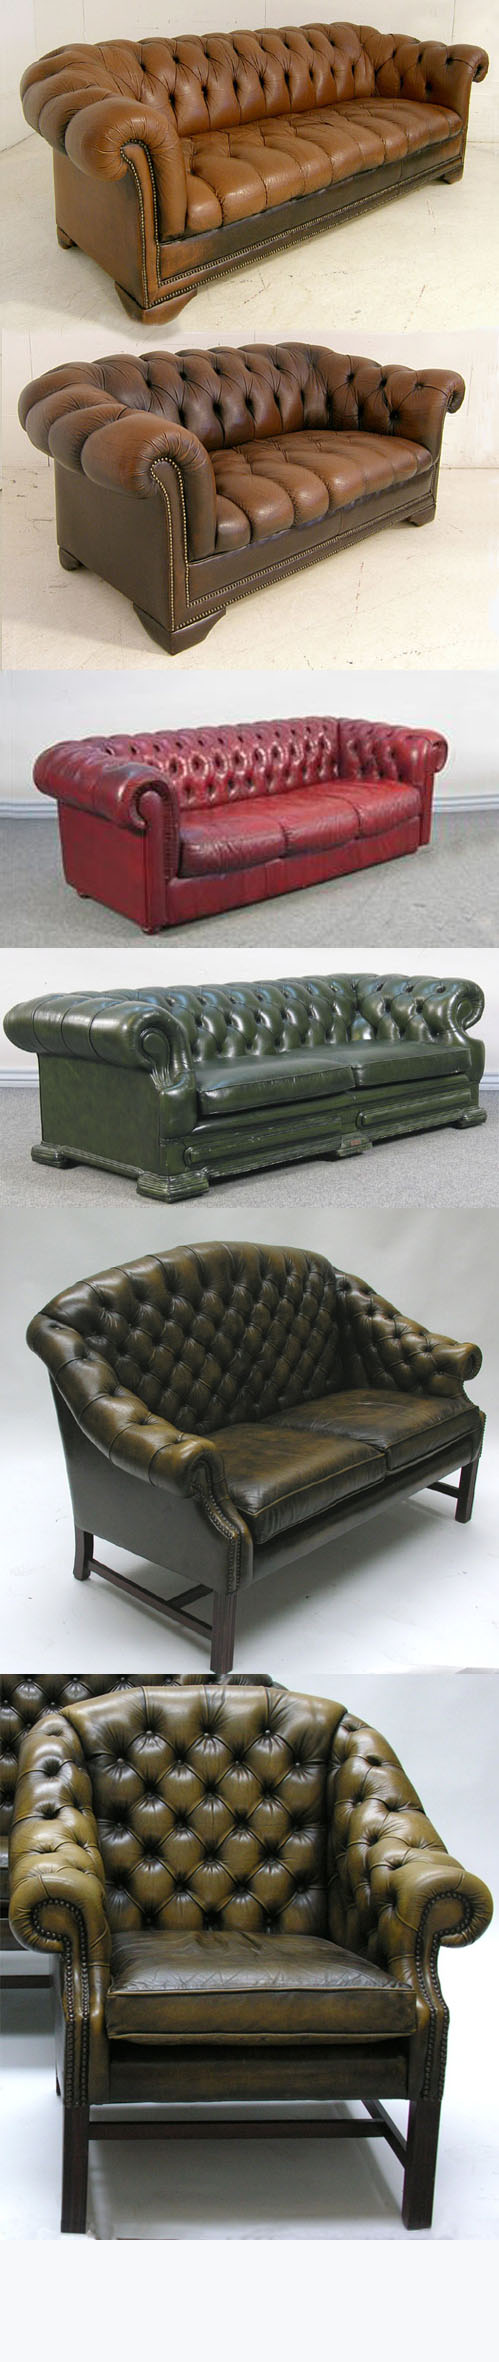 Chesterfield sofas - look under Chesterfield